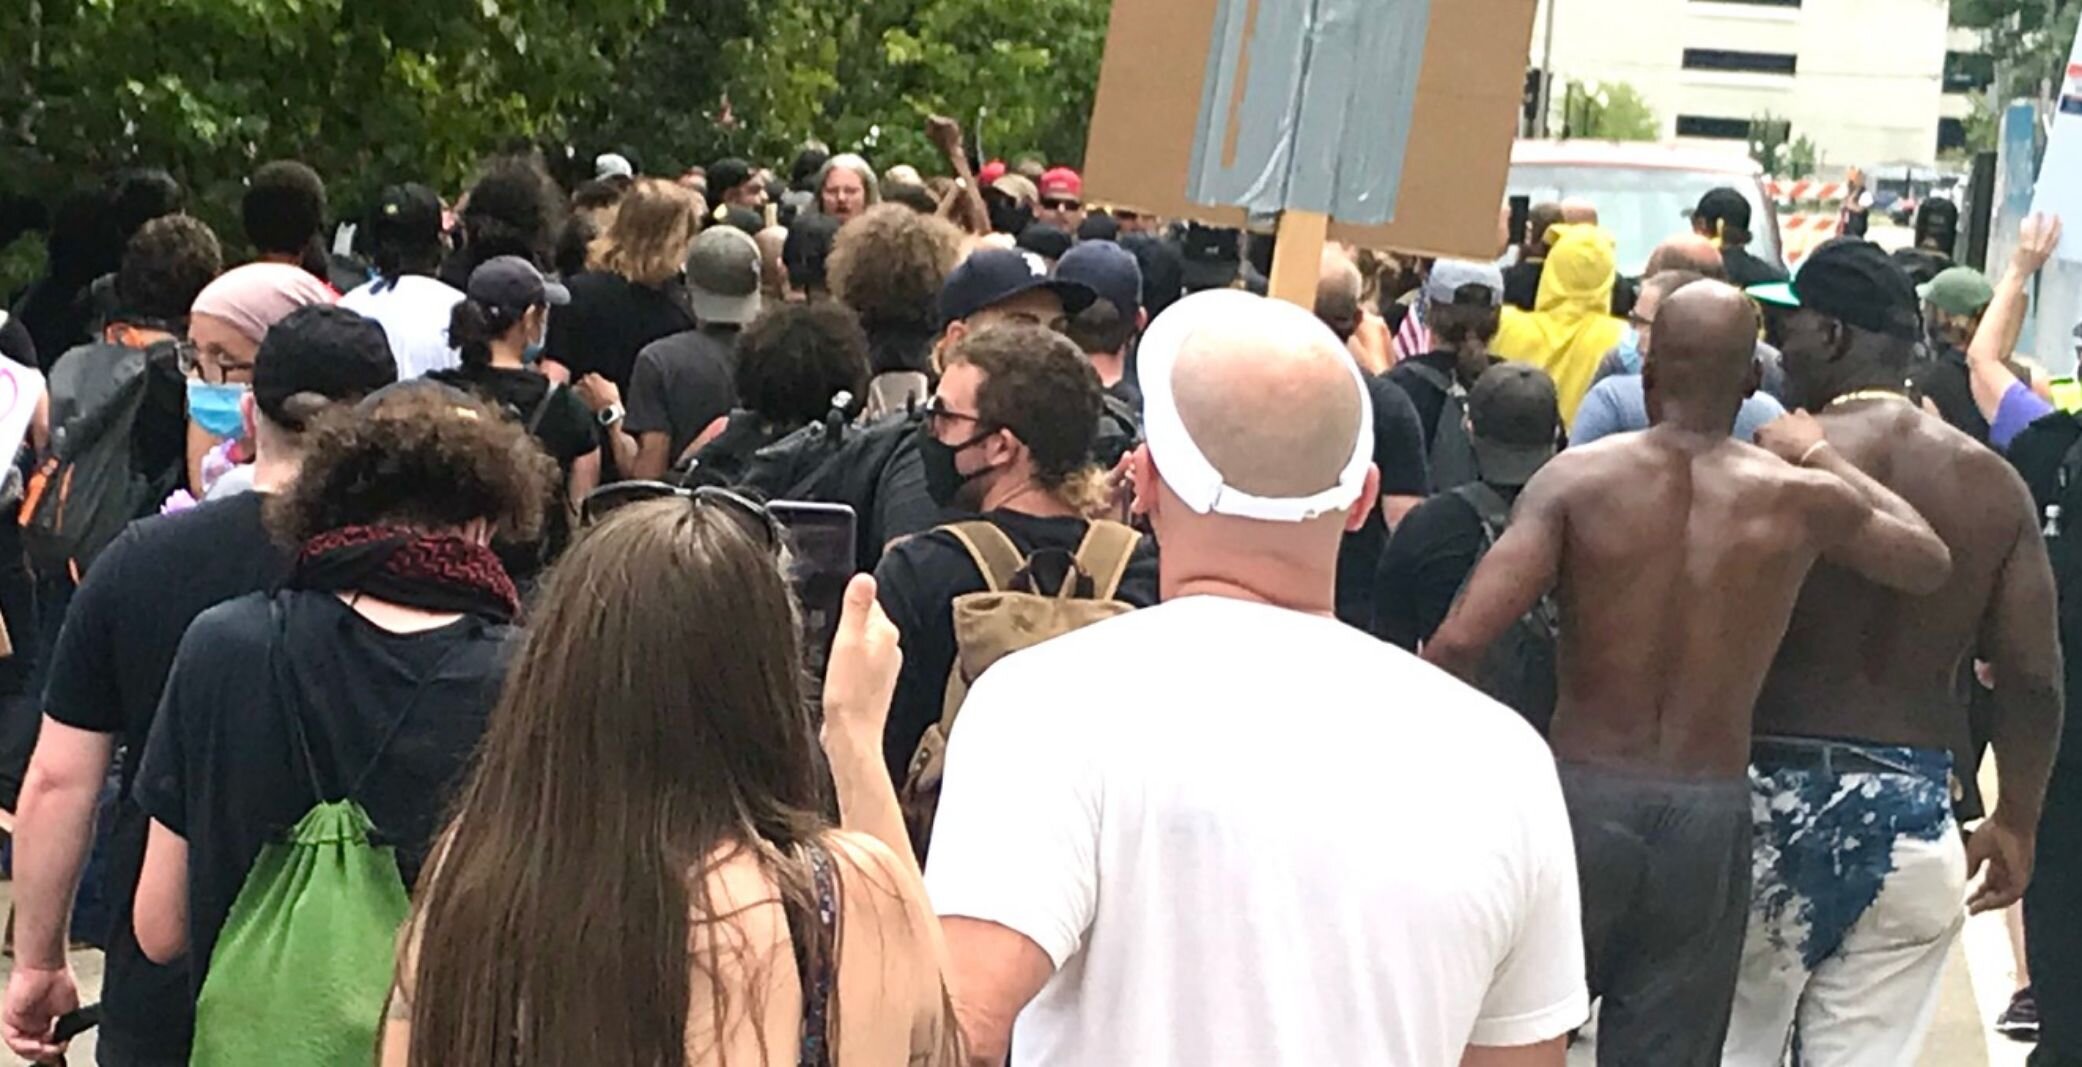 Counter-protesters, foreground, begin to clash with members of the Proud Boys, background, at the intersection of water Street and Edwards Street.